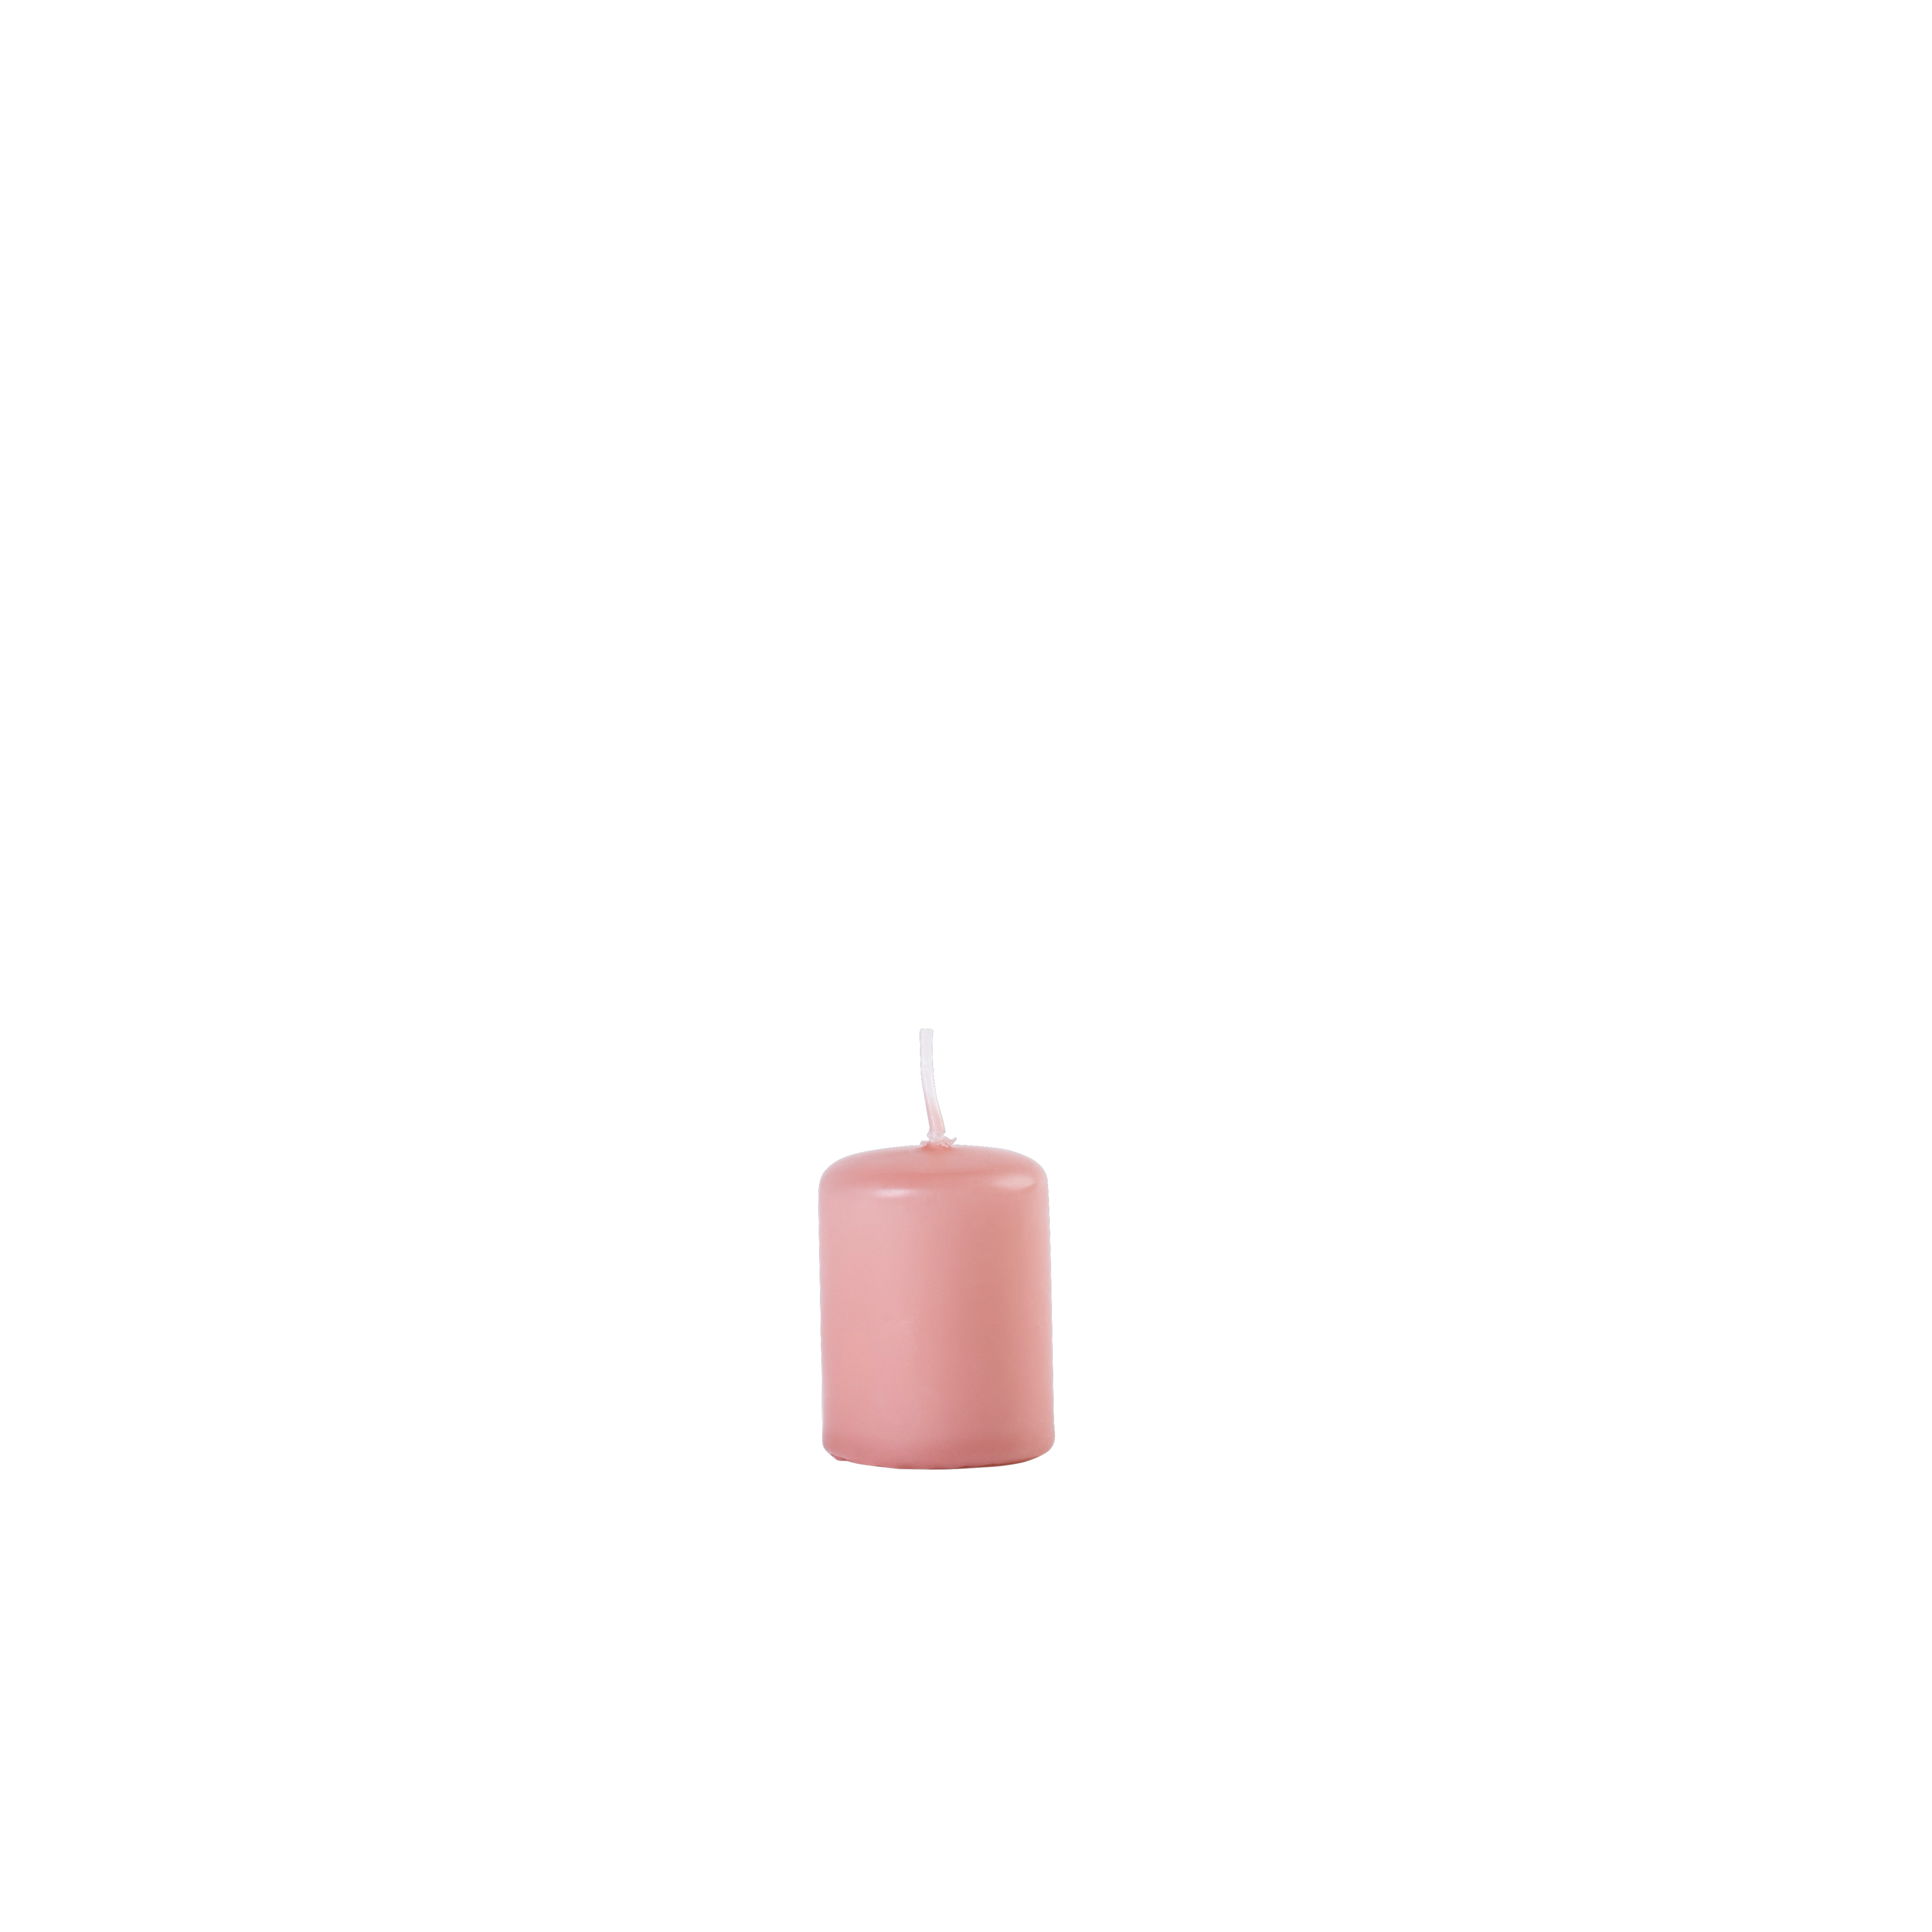  CILINDRO Bougie cylindrique rose_cilindro-bougie-cylindrique-rose